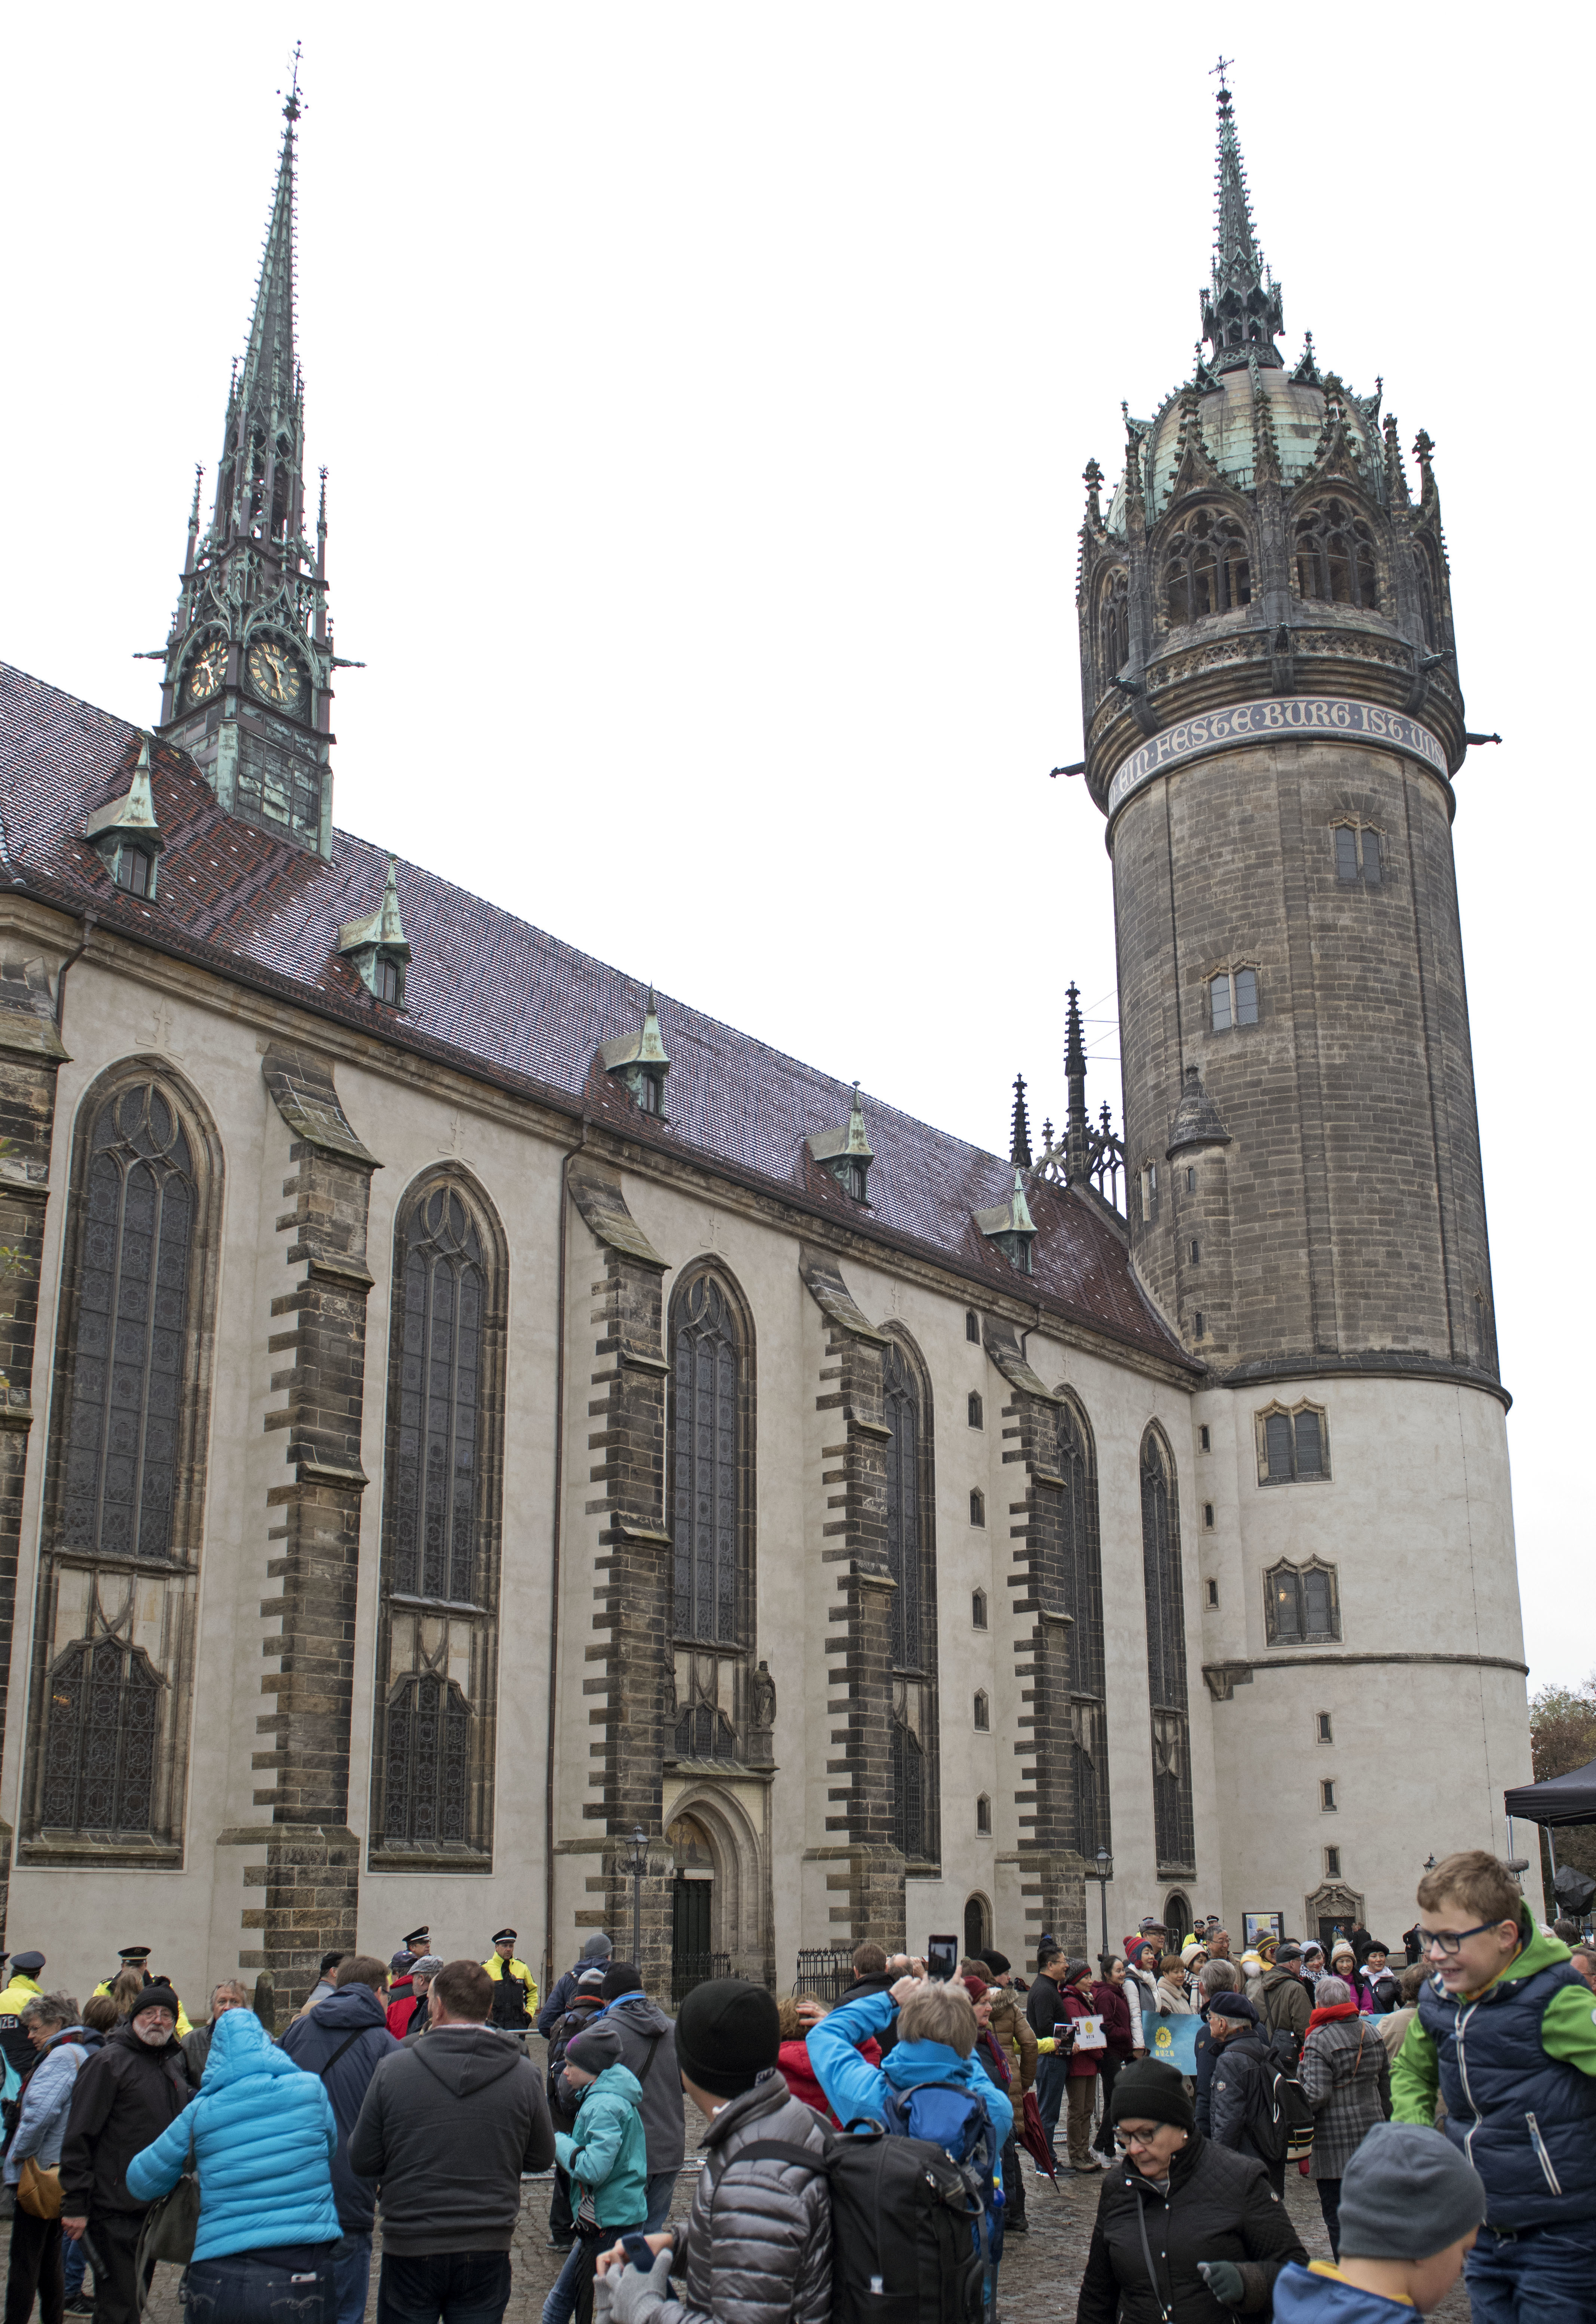 Visitors wait in front of the Castle Church prior the celebrations on the occasion the 500th Anniversary of the Reformation in Wittenberg, Germany, Tuesday, Oct. 31, 2017. German leaders will mark the 500th anniversary of the day Martin Luther is said to have nailed his theses challenging the Catholic Church's practice of selling indulgences to a church door, a starting point of the Reformation.  (AP Photo/Jens Meyer)